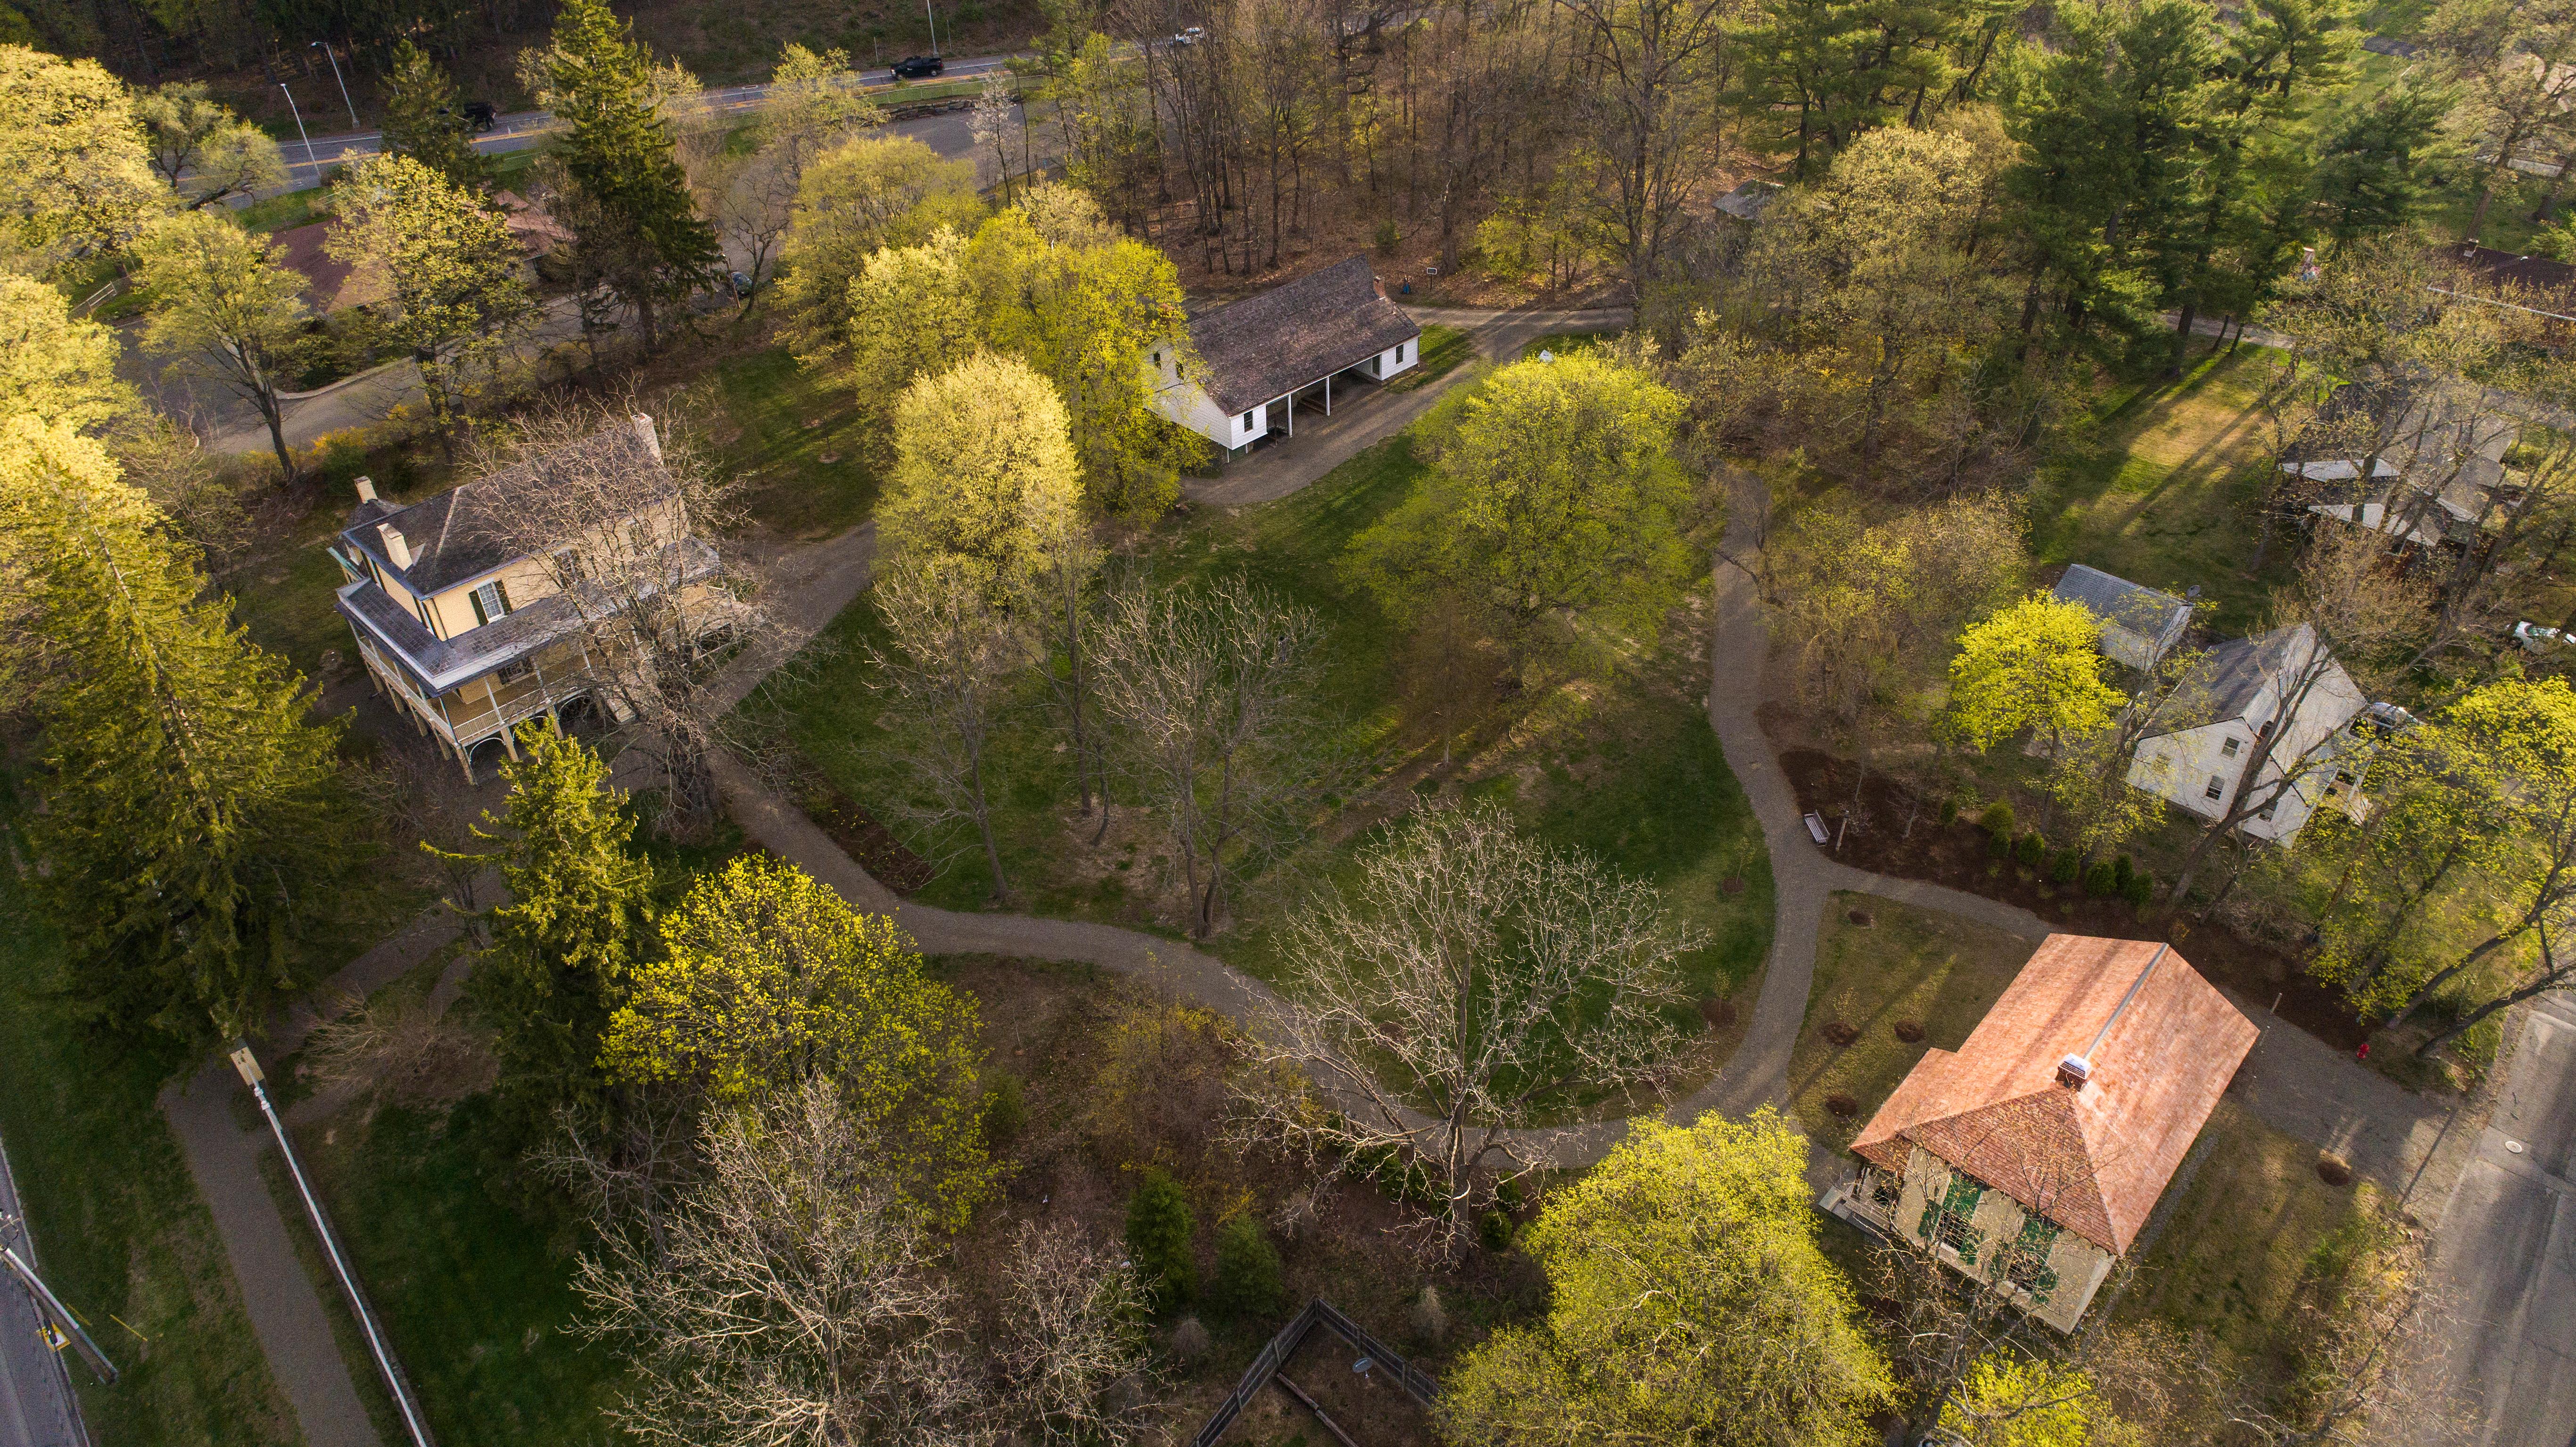 A bird's eye view of several buildings nested among trees and lawn.